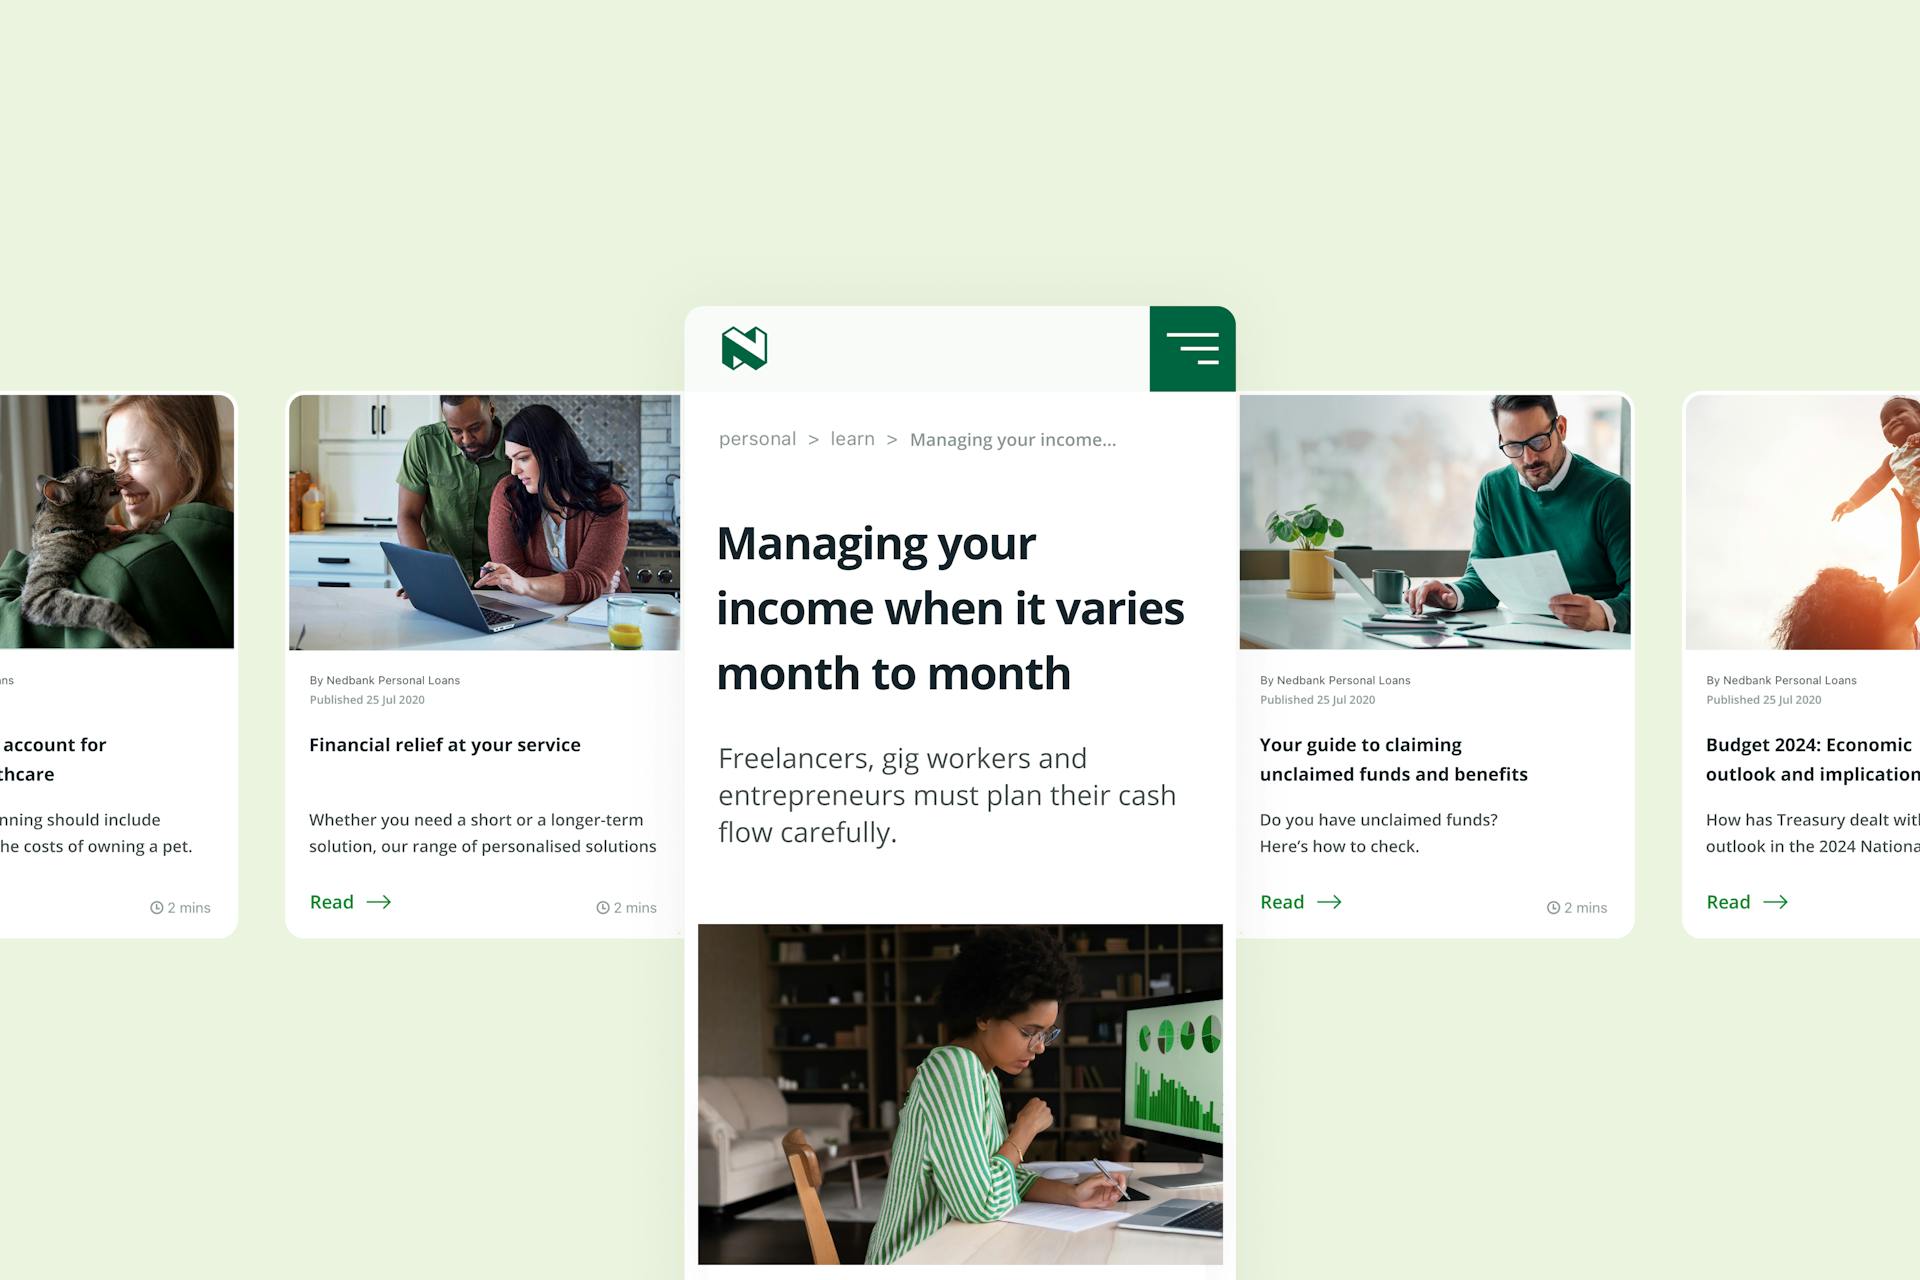 A series of screen shots taken from a banking app, set on a light green background.